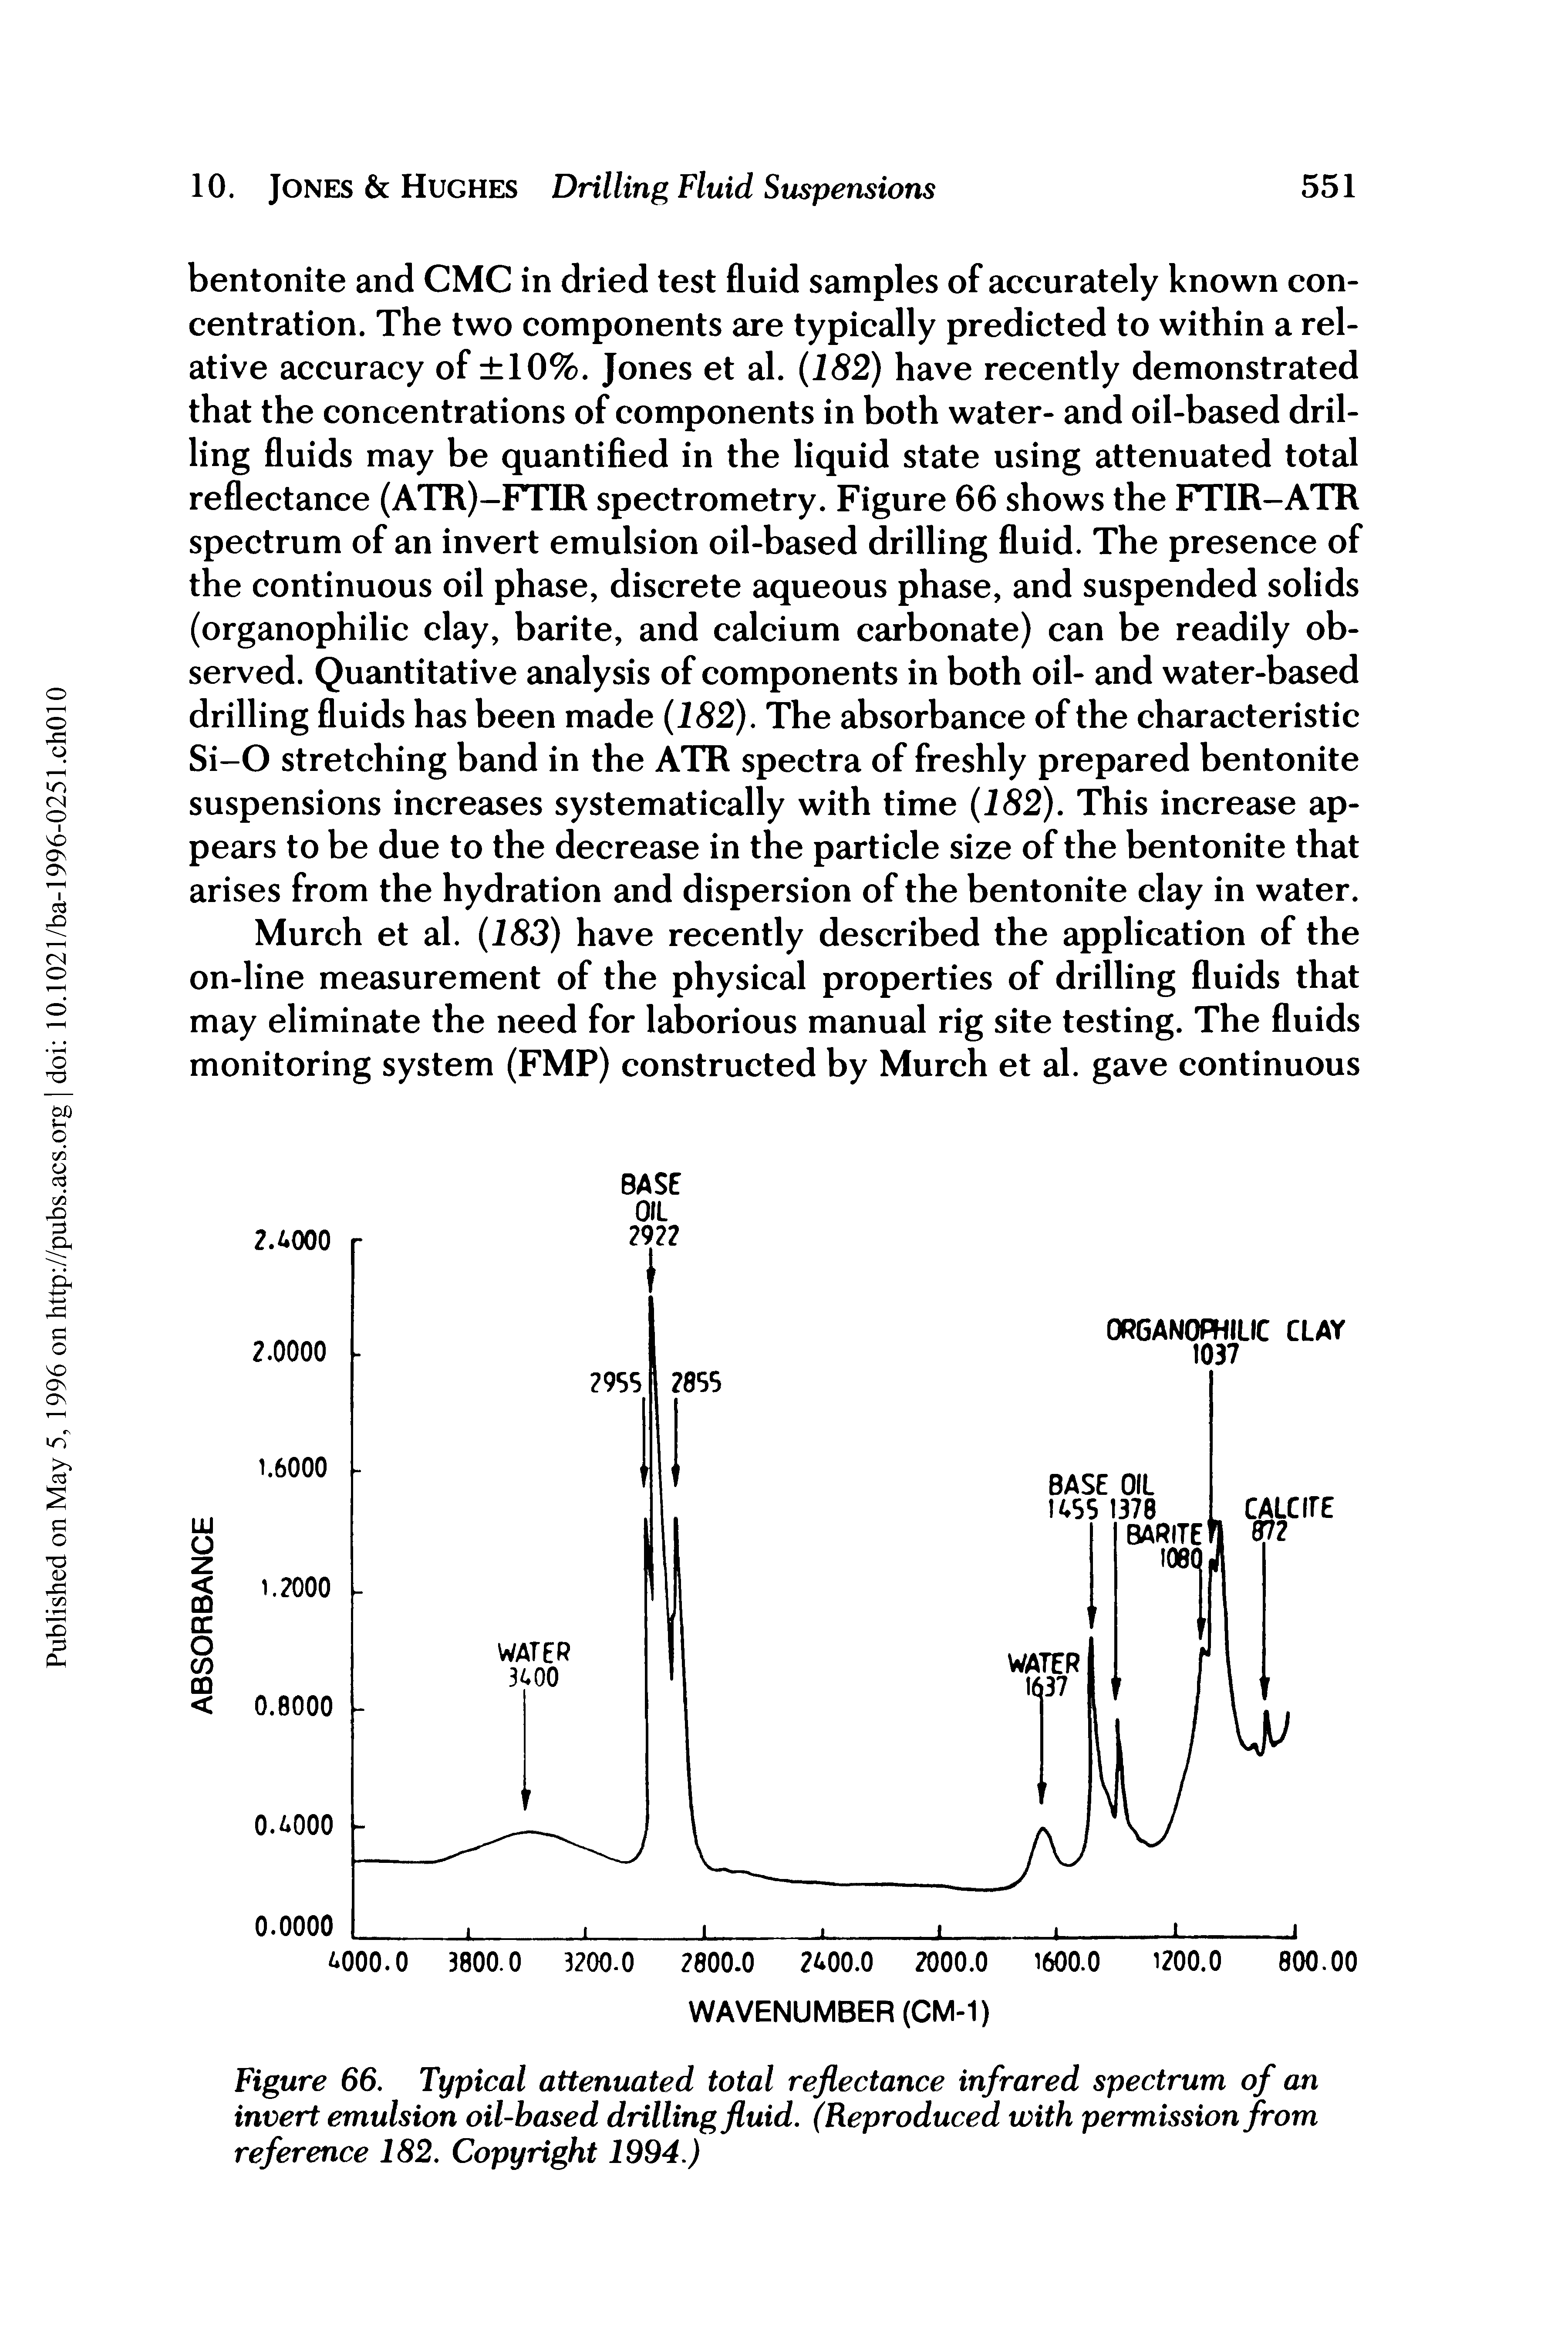 Figure 66. Typical attenuated total reflectance infrared spectrum of an invert emulsion oil-based drilling fluid. (Reproduced with permission from reference 182. Copyright 1994.)...